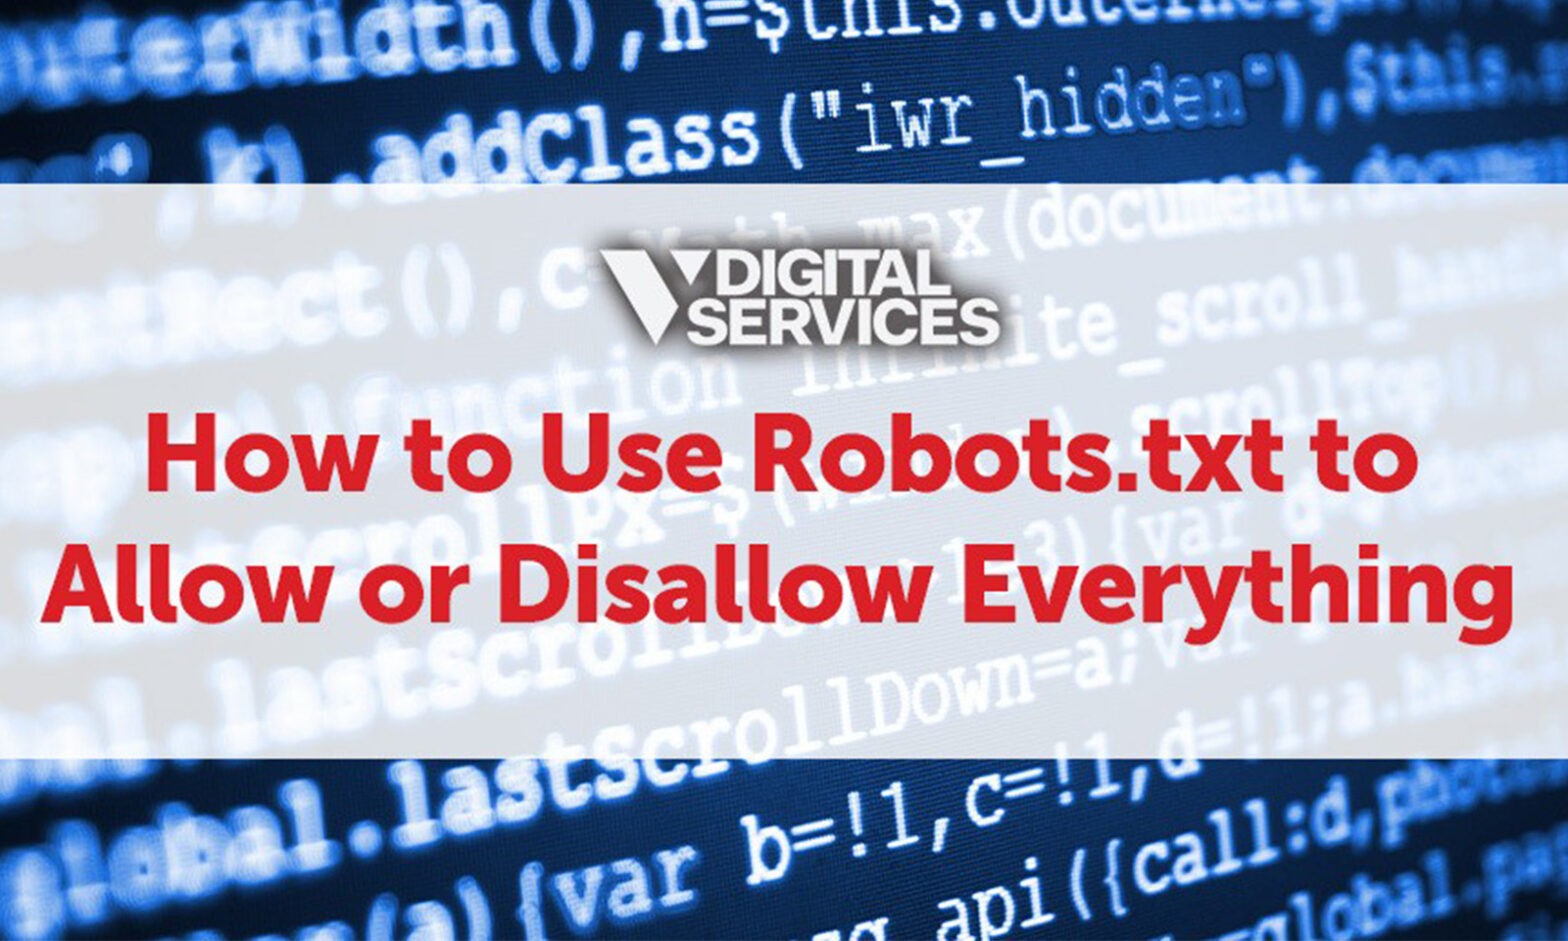 How to Use Robots.txt to Allow or Disallow Everything